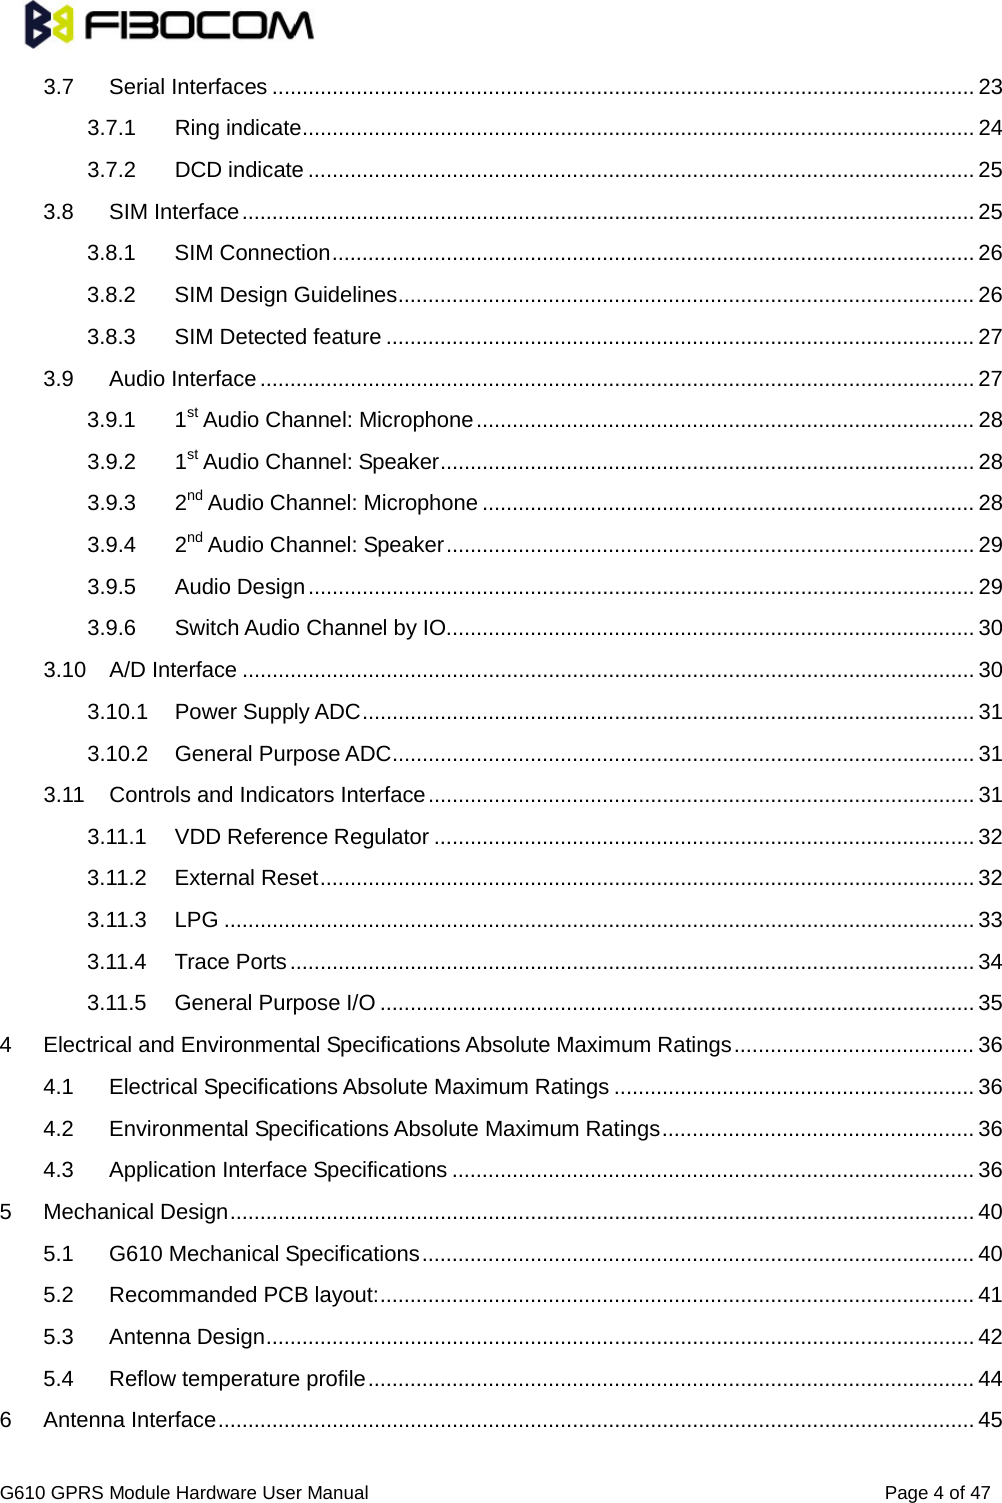                                                                                      G610 GPRS Module Hardware User Manual                                                          Page 4 of 47  3.7 Serial Interfaces   ..................................................................................................................... 233.7.1 Ring indicate   ................................................................................................................ 243.7.2 DCD indicate   ............................................................................................................... 253.8 SIM Interface   .......................................................................................................................... 253.8.1 SIM Connection   ........................................................................................................... 263.8.2 SIM Design Guidelines   ................................................................................................ 263.8.3 SIM Detected feature   .................................................................................................. 273.9 Audio Interface   ....................................................................................................................... 273.9.1 1st   Audio Channel: Microphone ................................................................................... 283.9.2 1st   Audio Channel: Speaker ......................................................................................... 283.9.3 2nd   Audio Channel: Microphone .................................................................................. 283.9.4 2nd   Audio Channel: Speaker ........................................................................................ 293.9.5 Audio Design   ............................................................................................................... 293.9.6 Switch Audio Channel by IO  ........................................................................................ 303.10 A/D Interface   .......................................................................................................................... 303.10.1 Power Supply ADC   ...................................................................................................... 313.10.2 General Purpose ADC   ................................................................................................. 313.11 Controls and Indicators Interface   ........................................................................................... 313.11.1 VDD Reference Regulator   .......................................................................................... 323.11.2 External Reset   ............................................................................................................. 323.11.3 LPG   ............................................................................................................................. 333.11.4 Trace Ports   .................................................................................................................. 343.11.5 General Purpose I/O   ................................................................................................... 354 Electrical and Environmental Specifications Absolute Maximum Ratings   ........................................ 364.1 Electrical Specifications Absolute Maximum Ratings   ............................................................ 364.2 Environmental Specifications Absolute Maximum Ratings   .................................................... 364.3 Application Interface Specifications   ....................................................................................... 365 Mechanical Design   ............................................................................................................................ 405.1 G610 Mechanical Specifications   ............................................................................................ 405.2 Recommanded PCB layout:   ................................................................................................... 415.3 Antenna Design   ...................................................................................................................... 425.4 Reflow temperature profile   ..................................................................................................... 446 Antenna Interface   .............................................................................................................................. 45